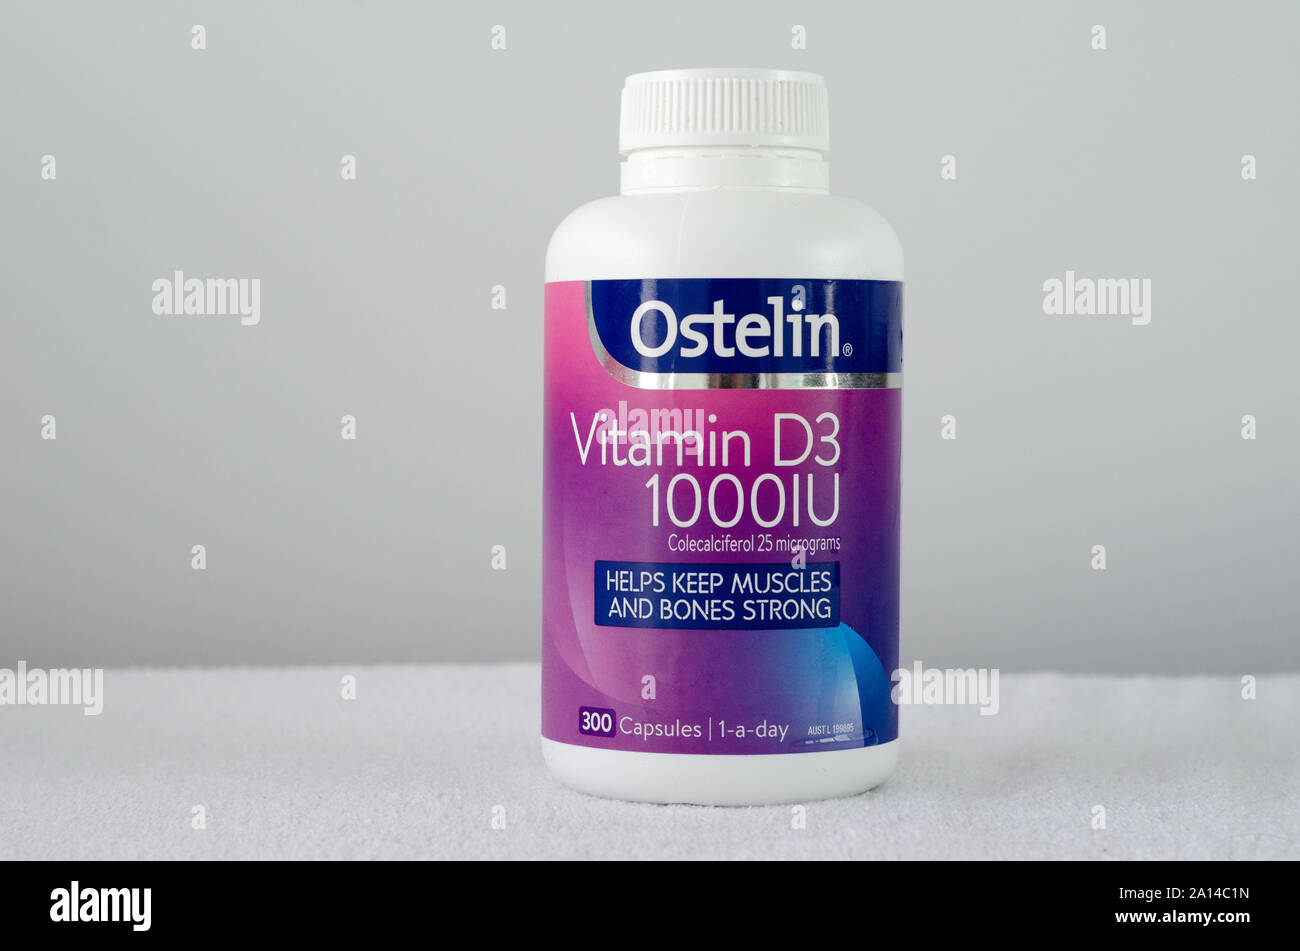 A bottle of Ostelin Vitamin D3. It helps keep muscles and bones strong. Stock Photo